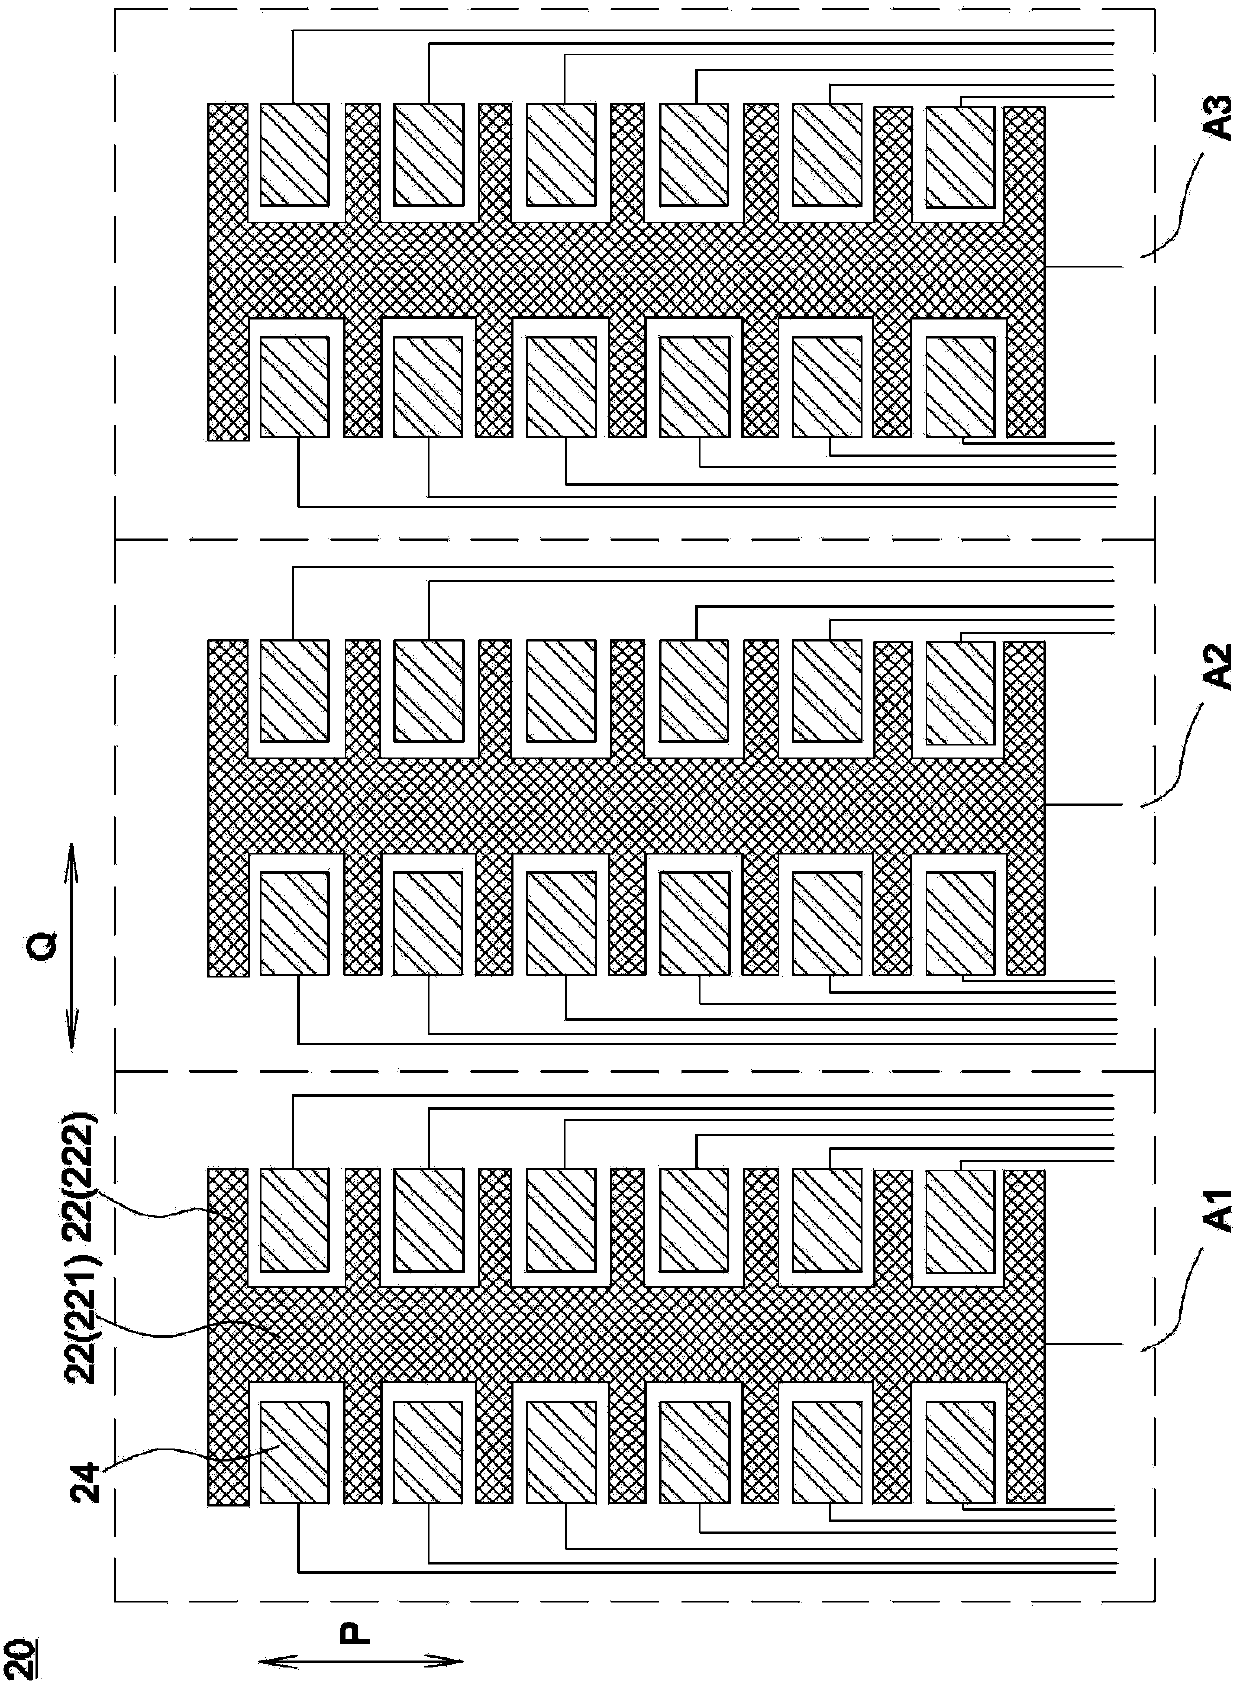 Touch-sensing electrode structure and touch-sensitive device